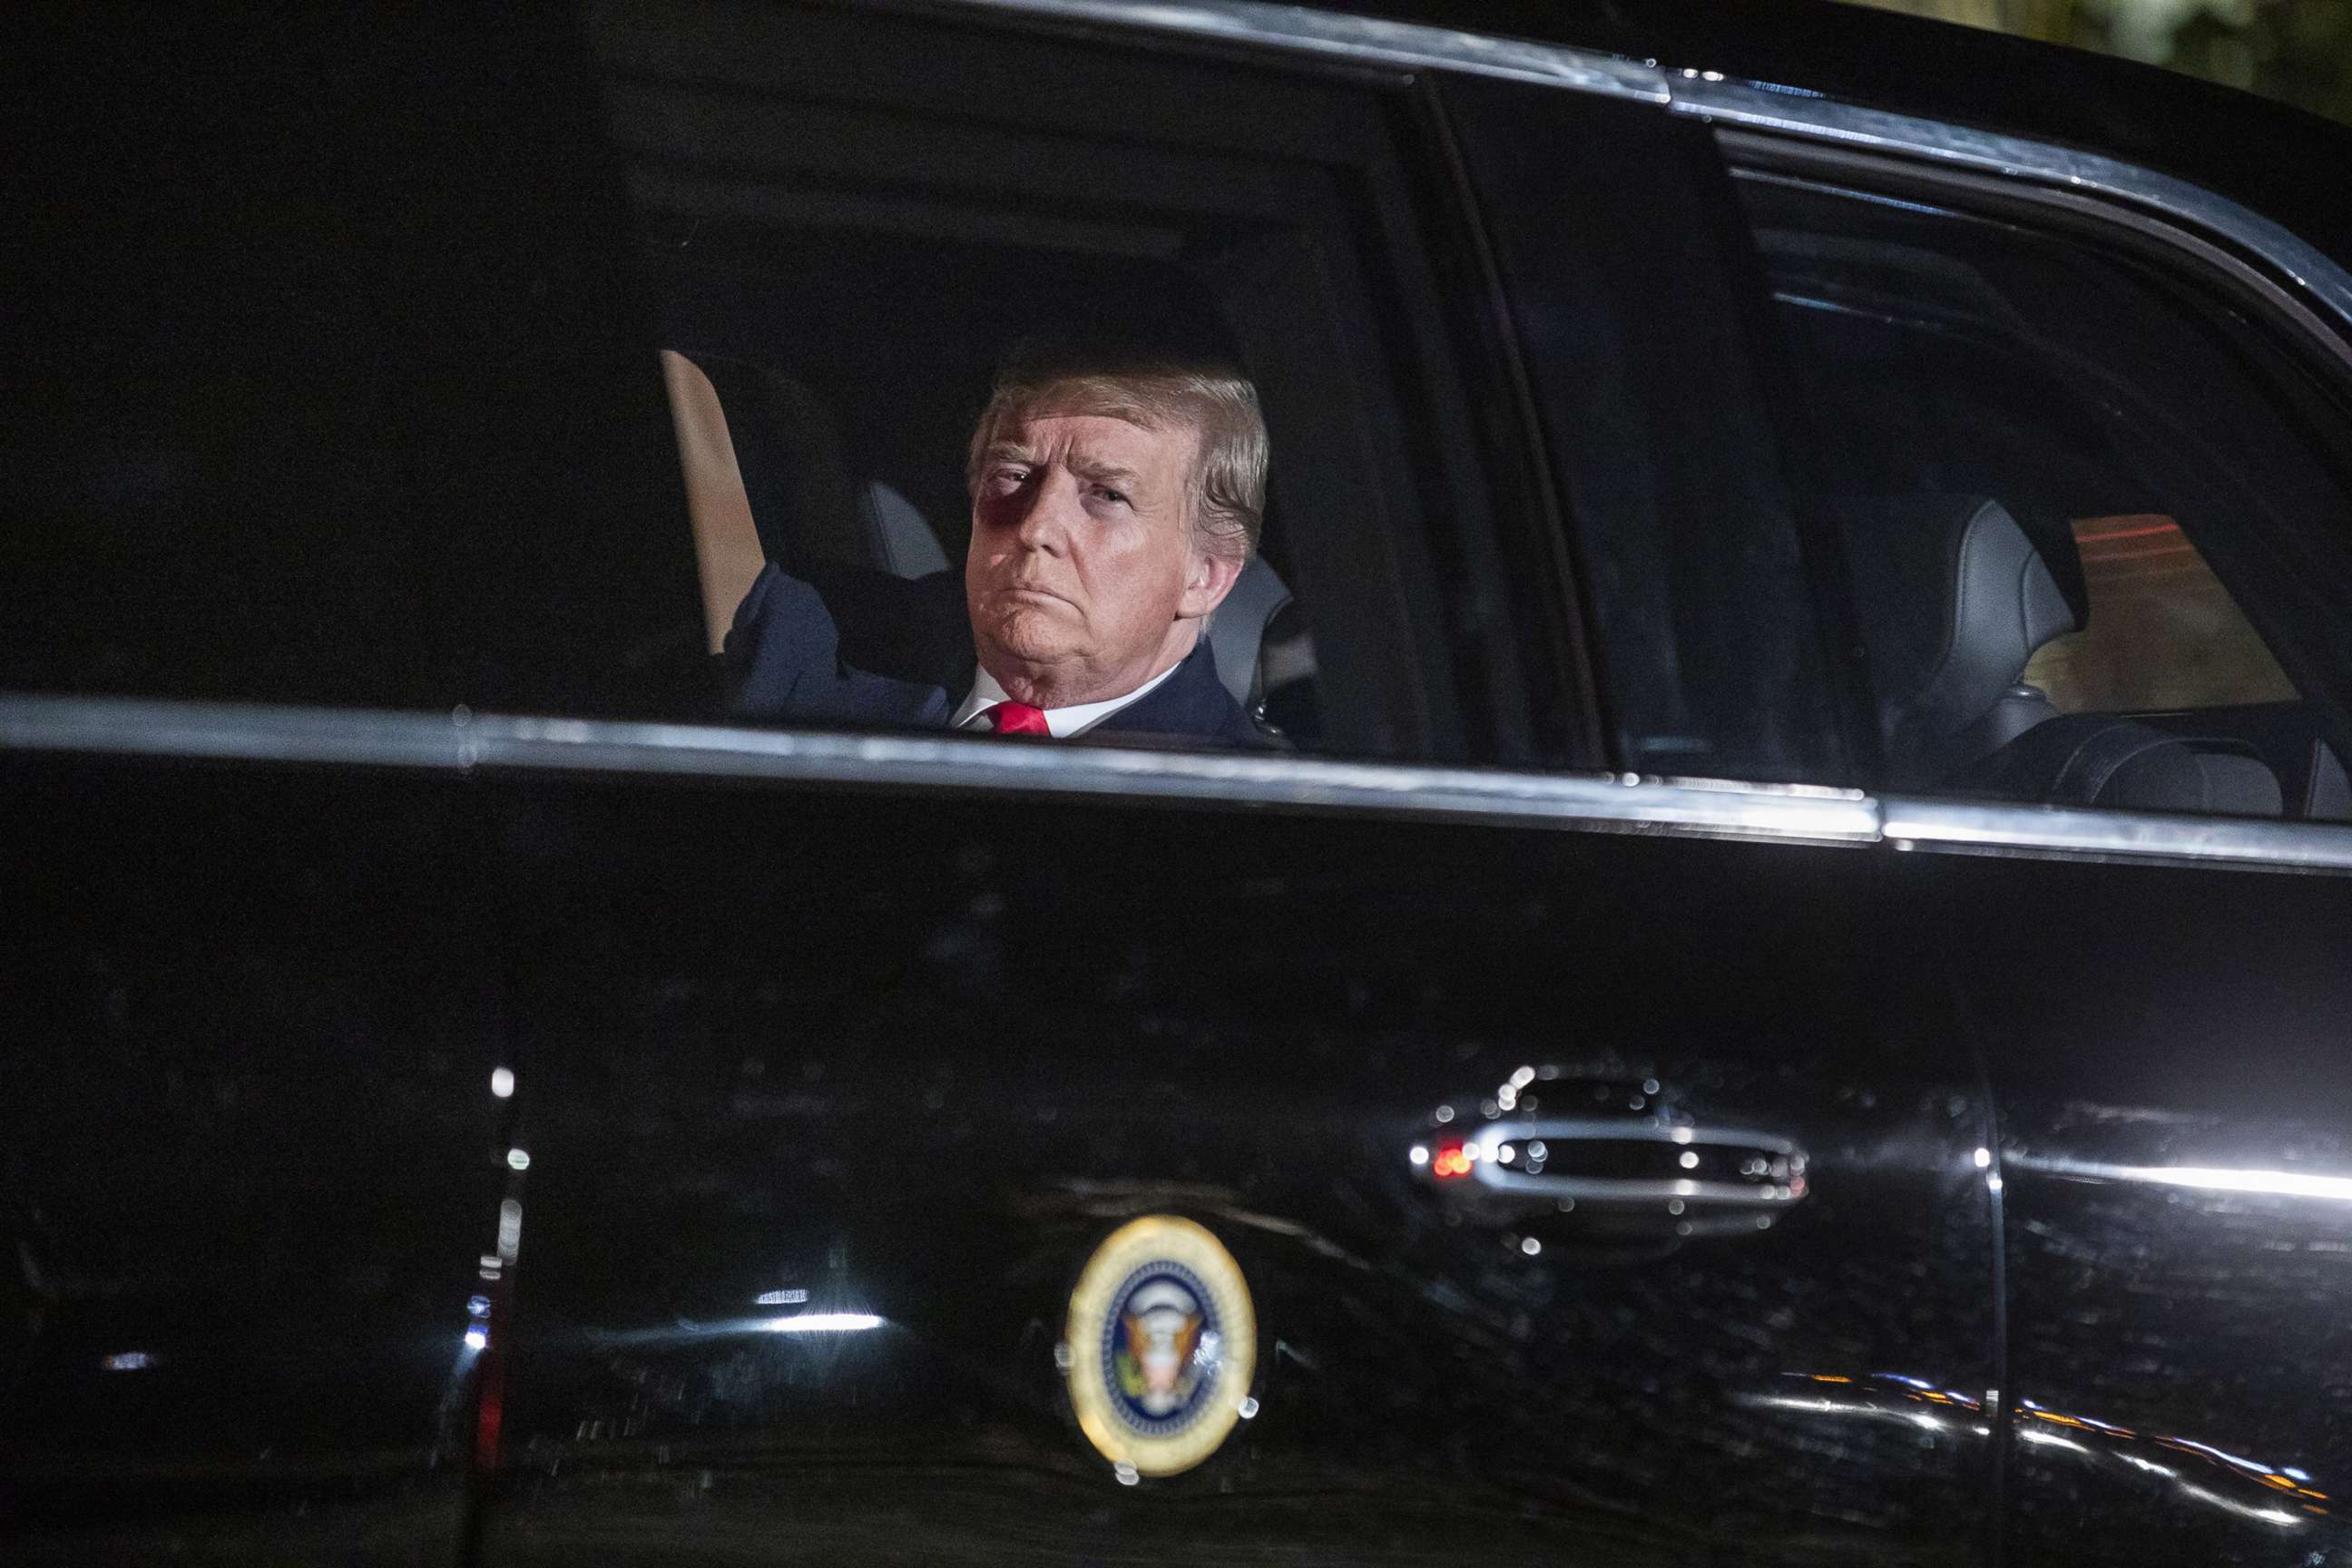 PHOTO: President Donald Trump sits in the presidential limo as he departs the White House for Capitol Hill, where he will deliver his second State of the Union speech, on Feb. 5, 2019 in Washington, D.C.